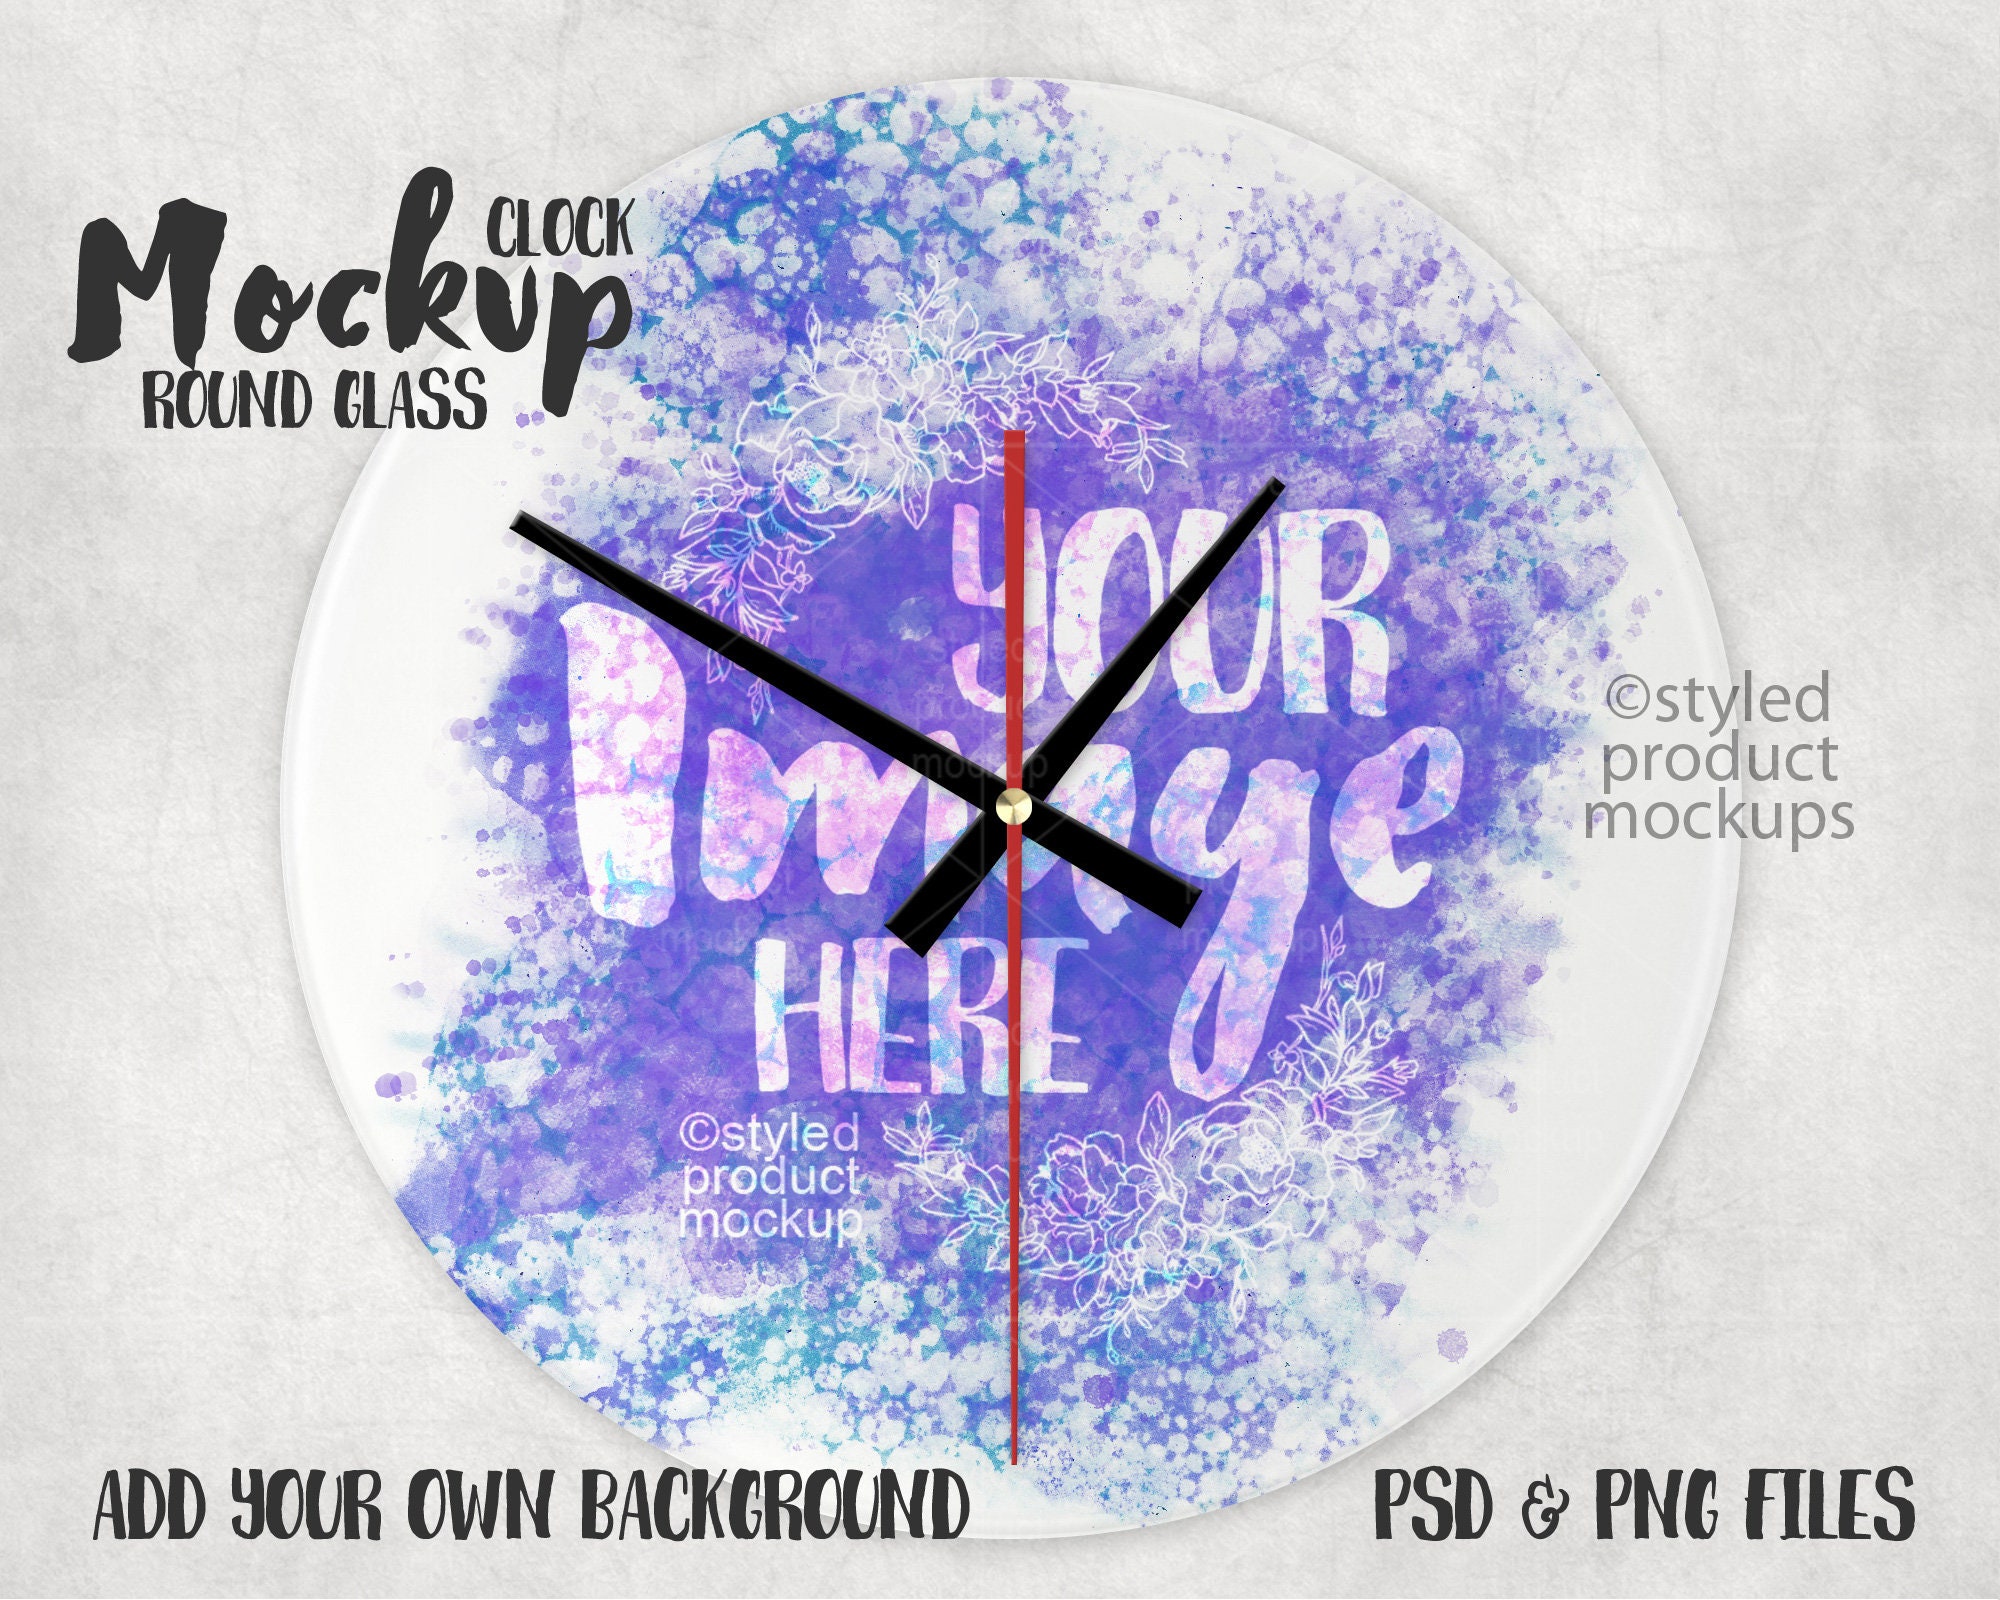 PENCIL CLOCK FACE, Sublimation Blanks, Unisub, Blanks for Sublimation,  Photo Frame, Diy, Wall Decor, Gifts, Wall Clock, Home Decor, Wall Art 